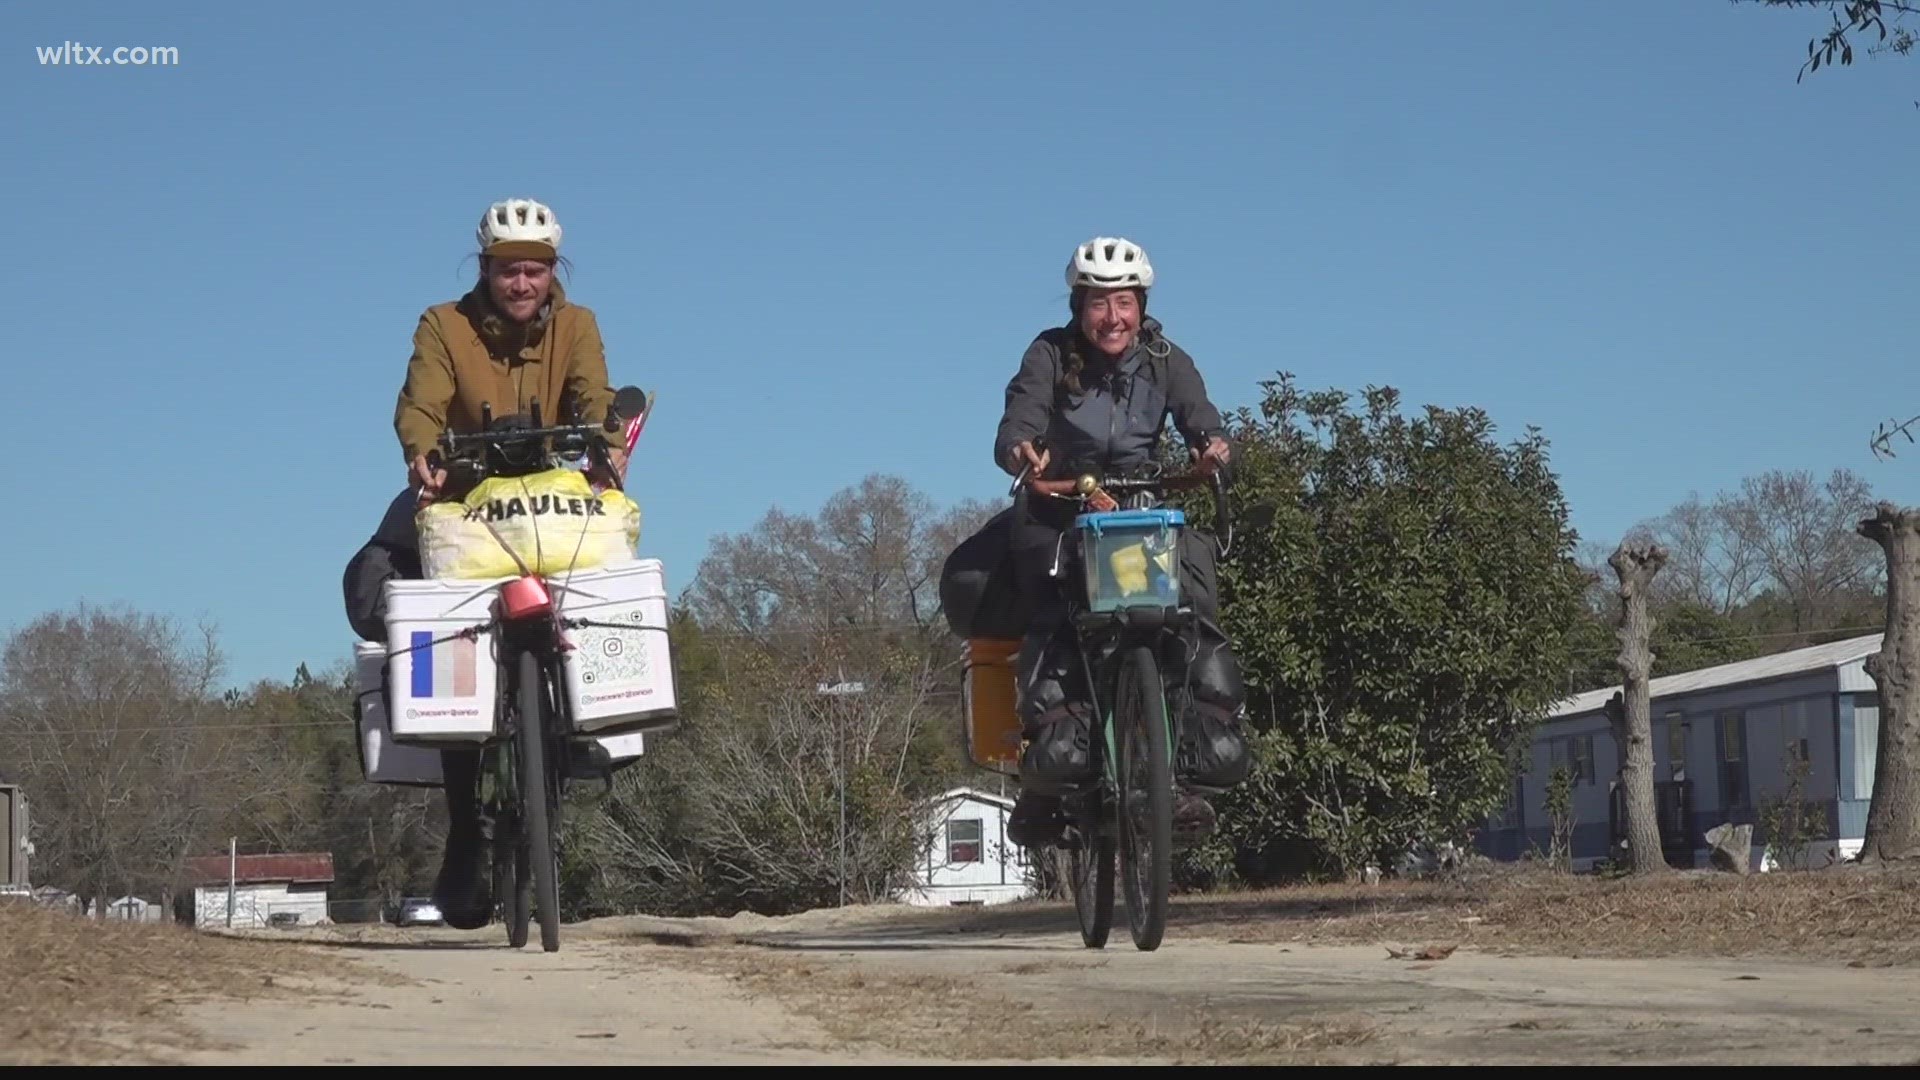 A couple from France are traveling in the Midlands after a three year world tour hitchhiking or biking the whole way.